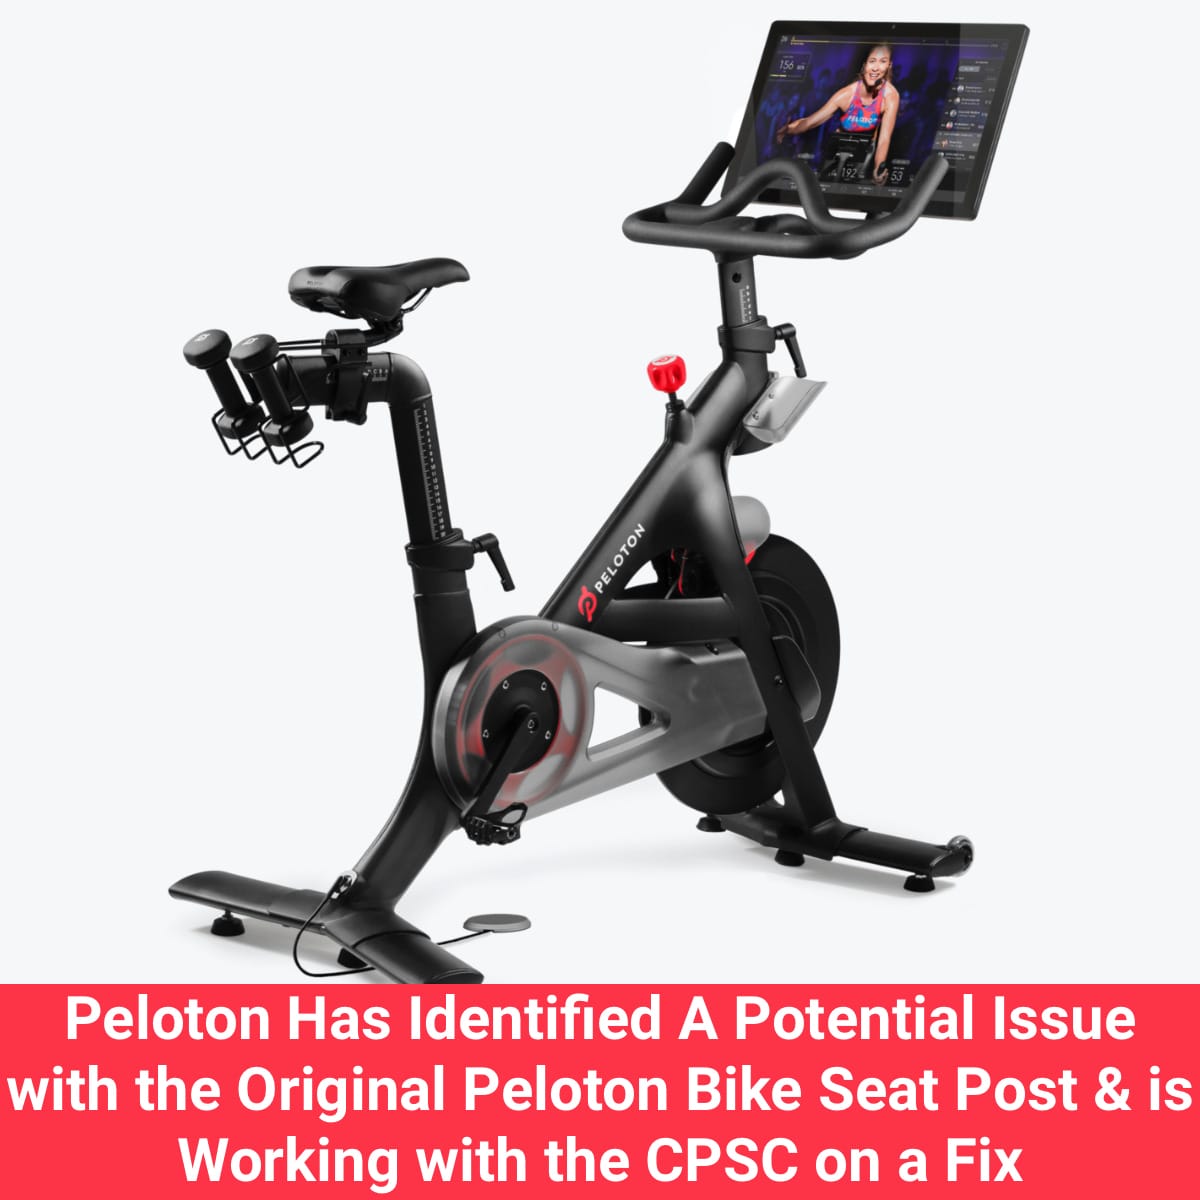 Recall for Peloton Bike (original model PL01) issued by CPSC